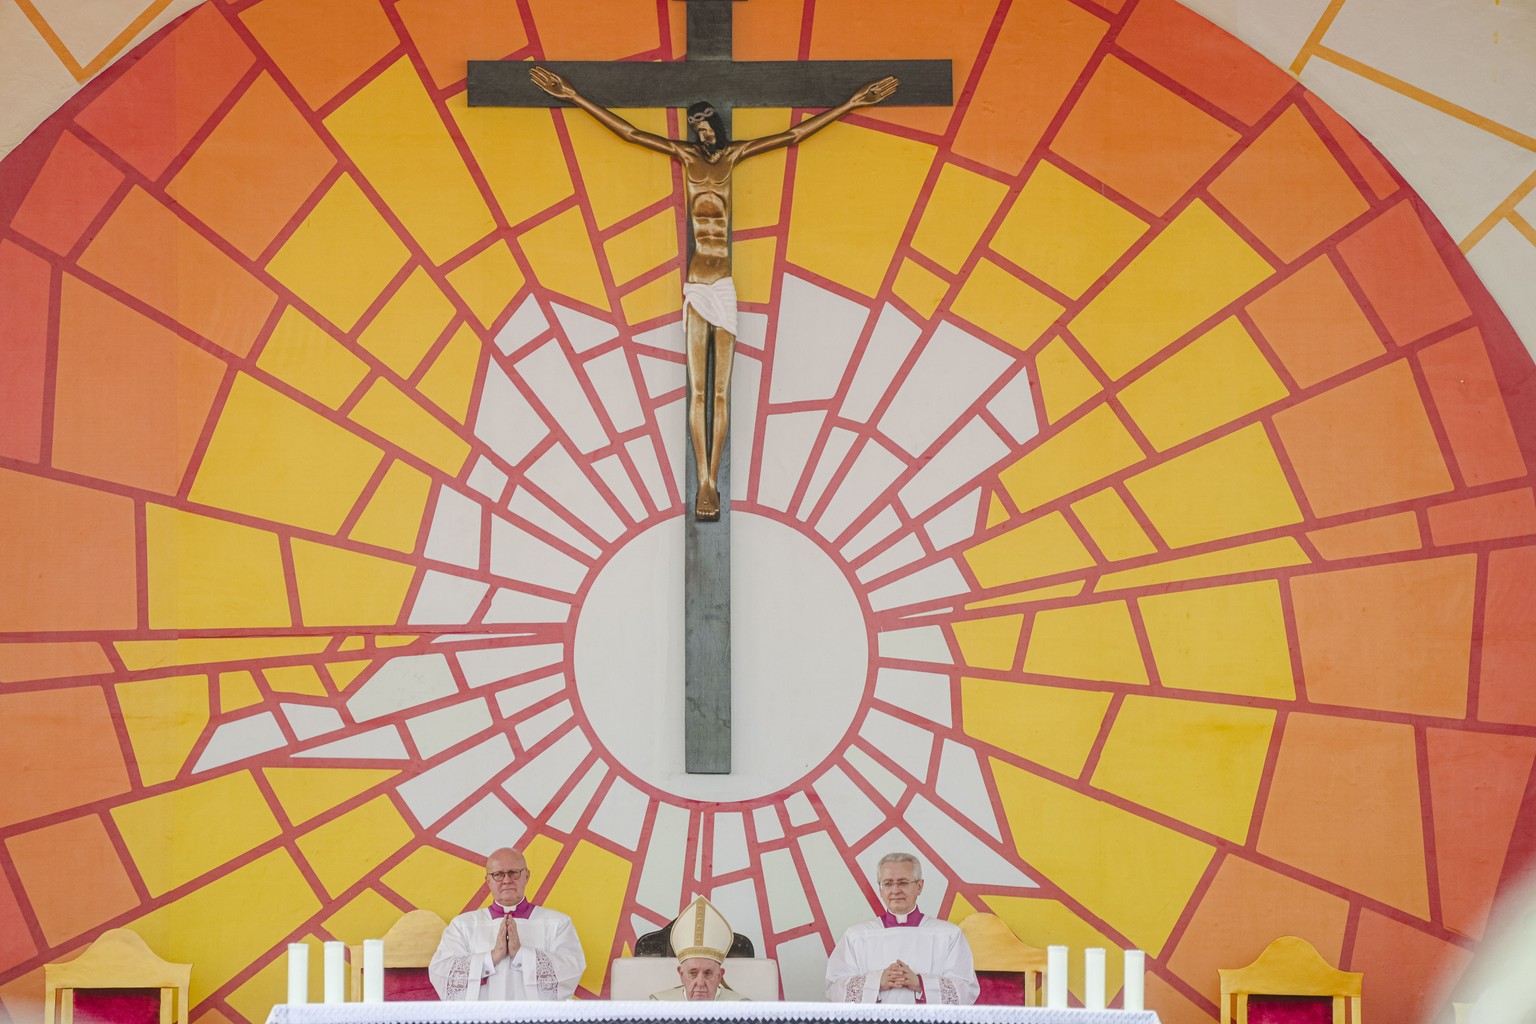 PopeFrancis, center, sits on the altar at Ndolo airport where he will preside over the Holy Mass in Kinshasa, Congo, Wednesday Feb. 1, 2023. Francis is in Congo and South Sudan for a six-day trip, hop ...